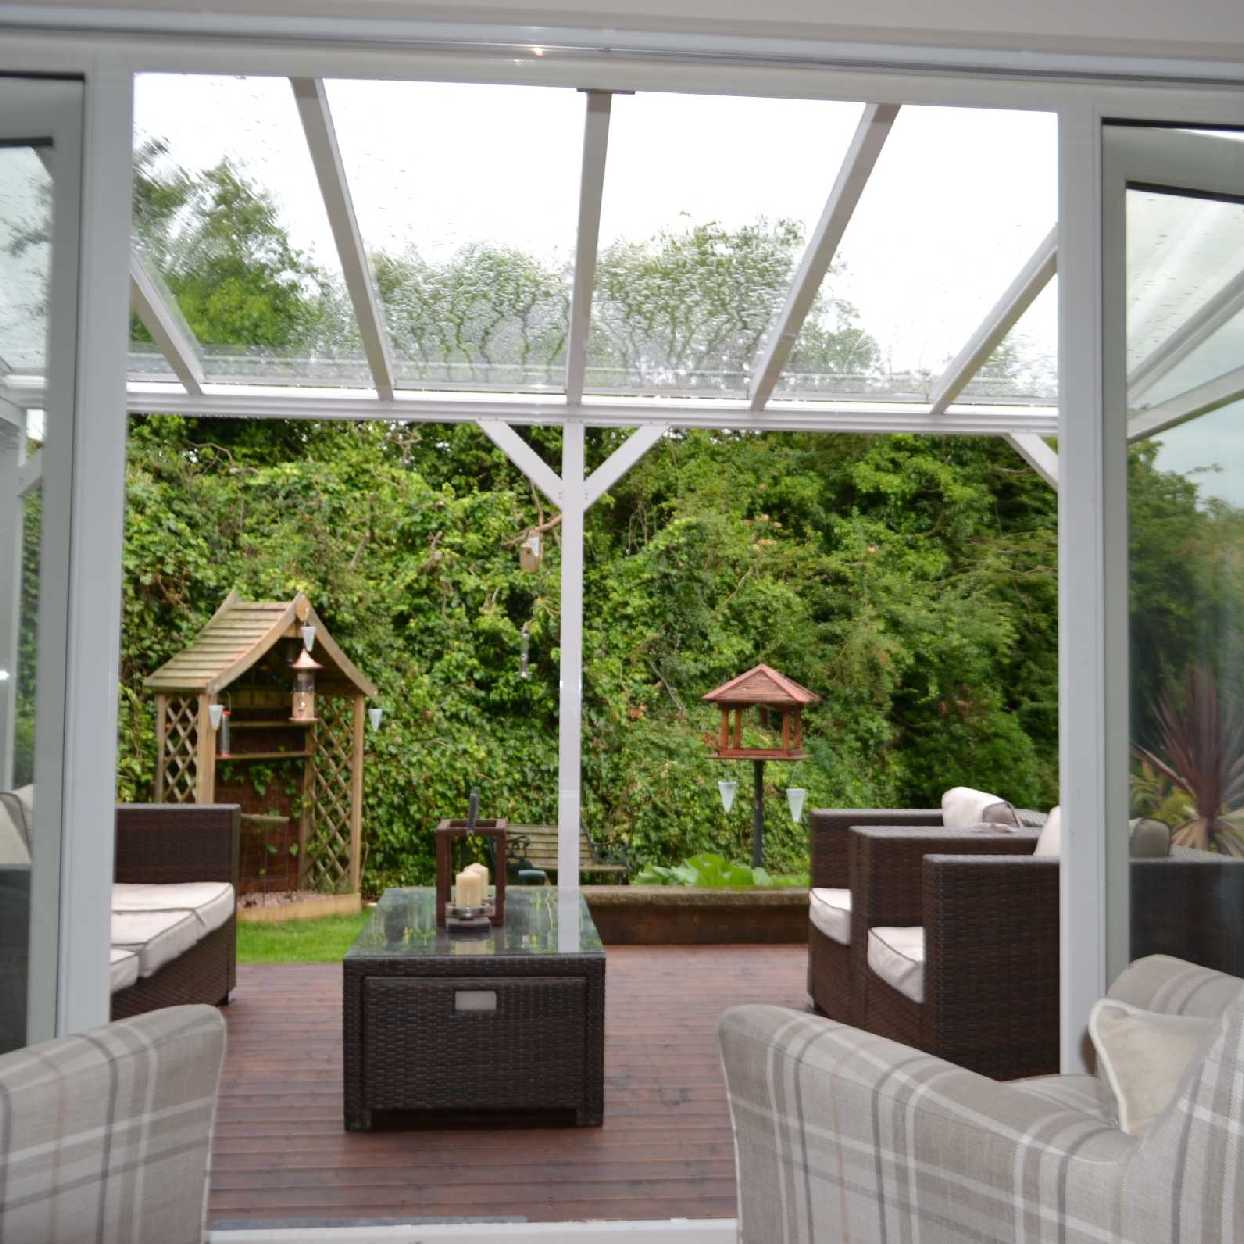 Great selection of Omega Smart Lean-To Canopy, White UNGLAZED for 6mm Glazing - 2.8m (W) x 2.5m (P), (2) Supporting Posts